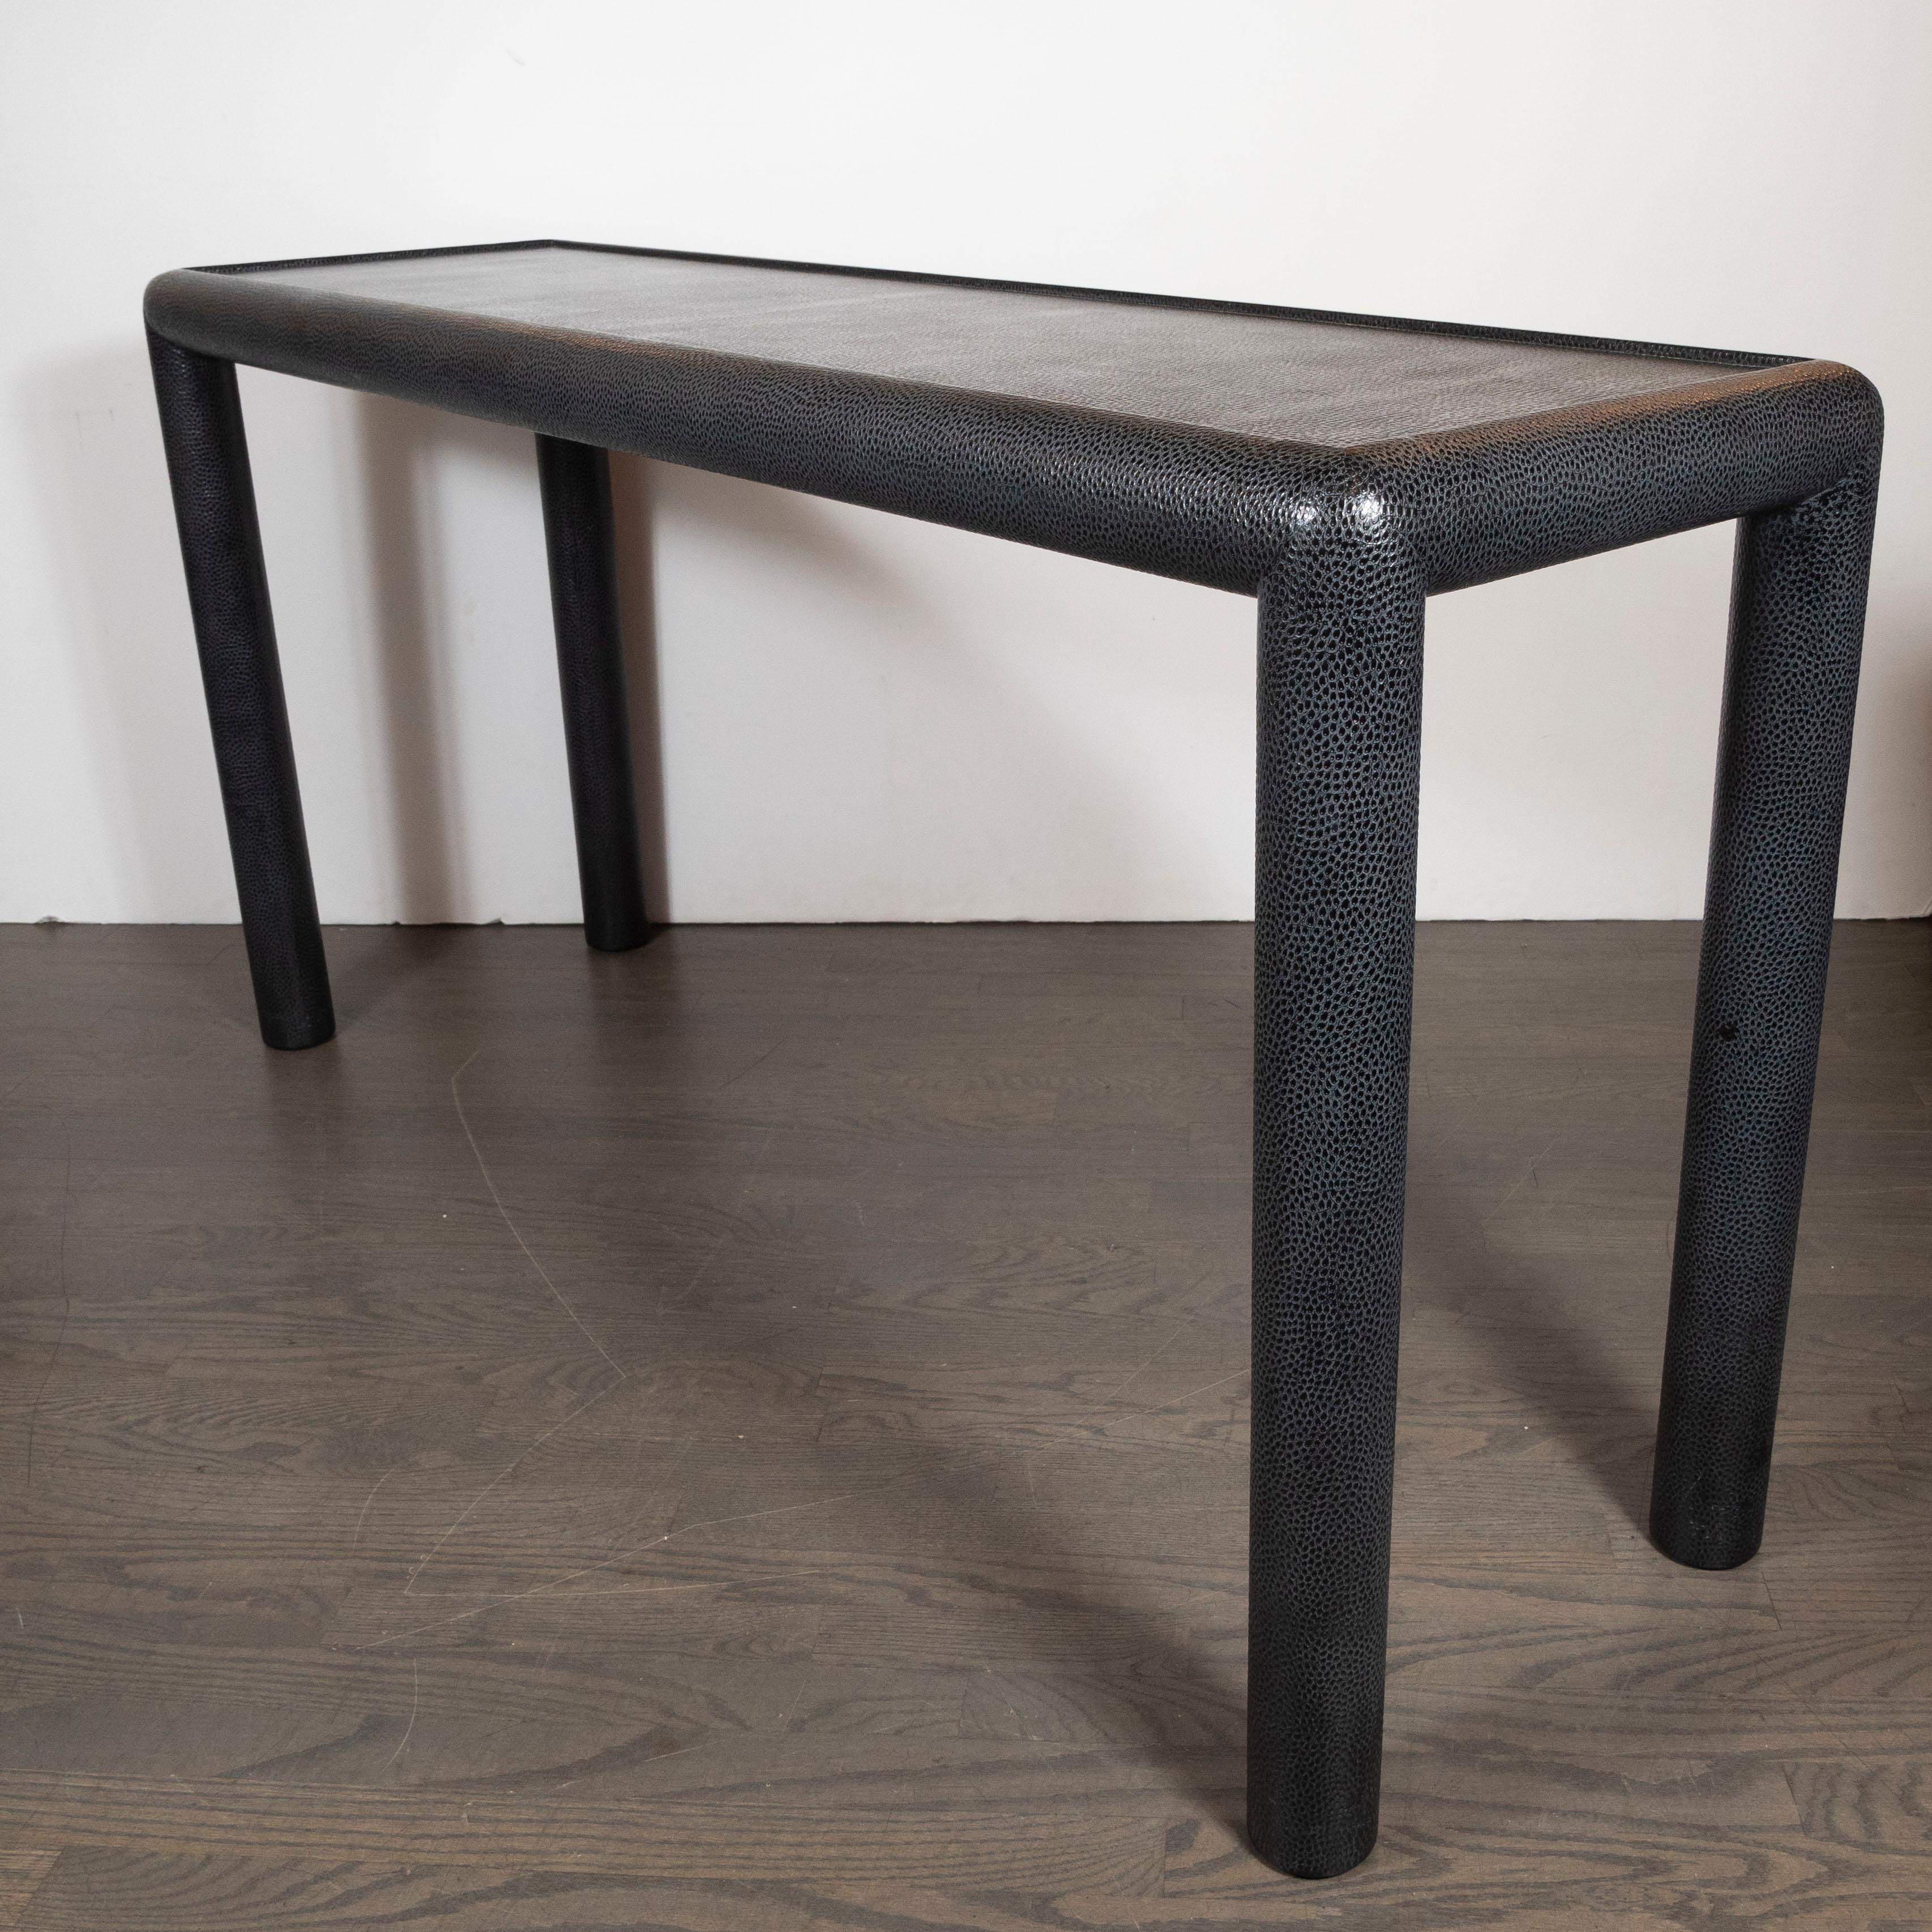 American Mid-Century Modern Black Ostrich Console Table Signed by Karl Springer